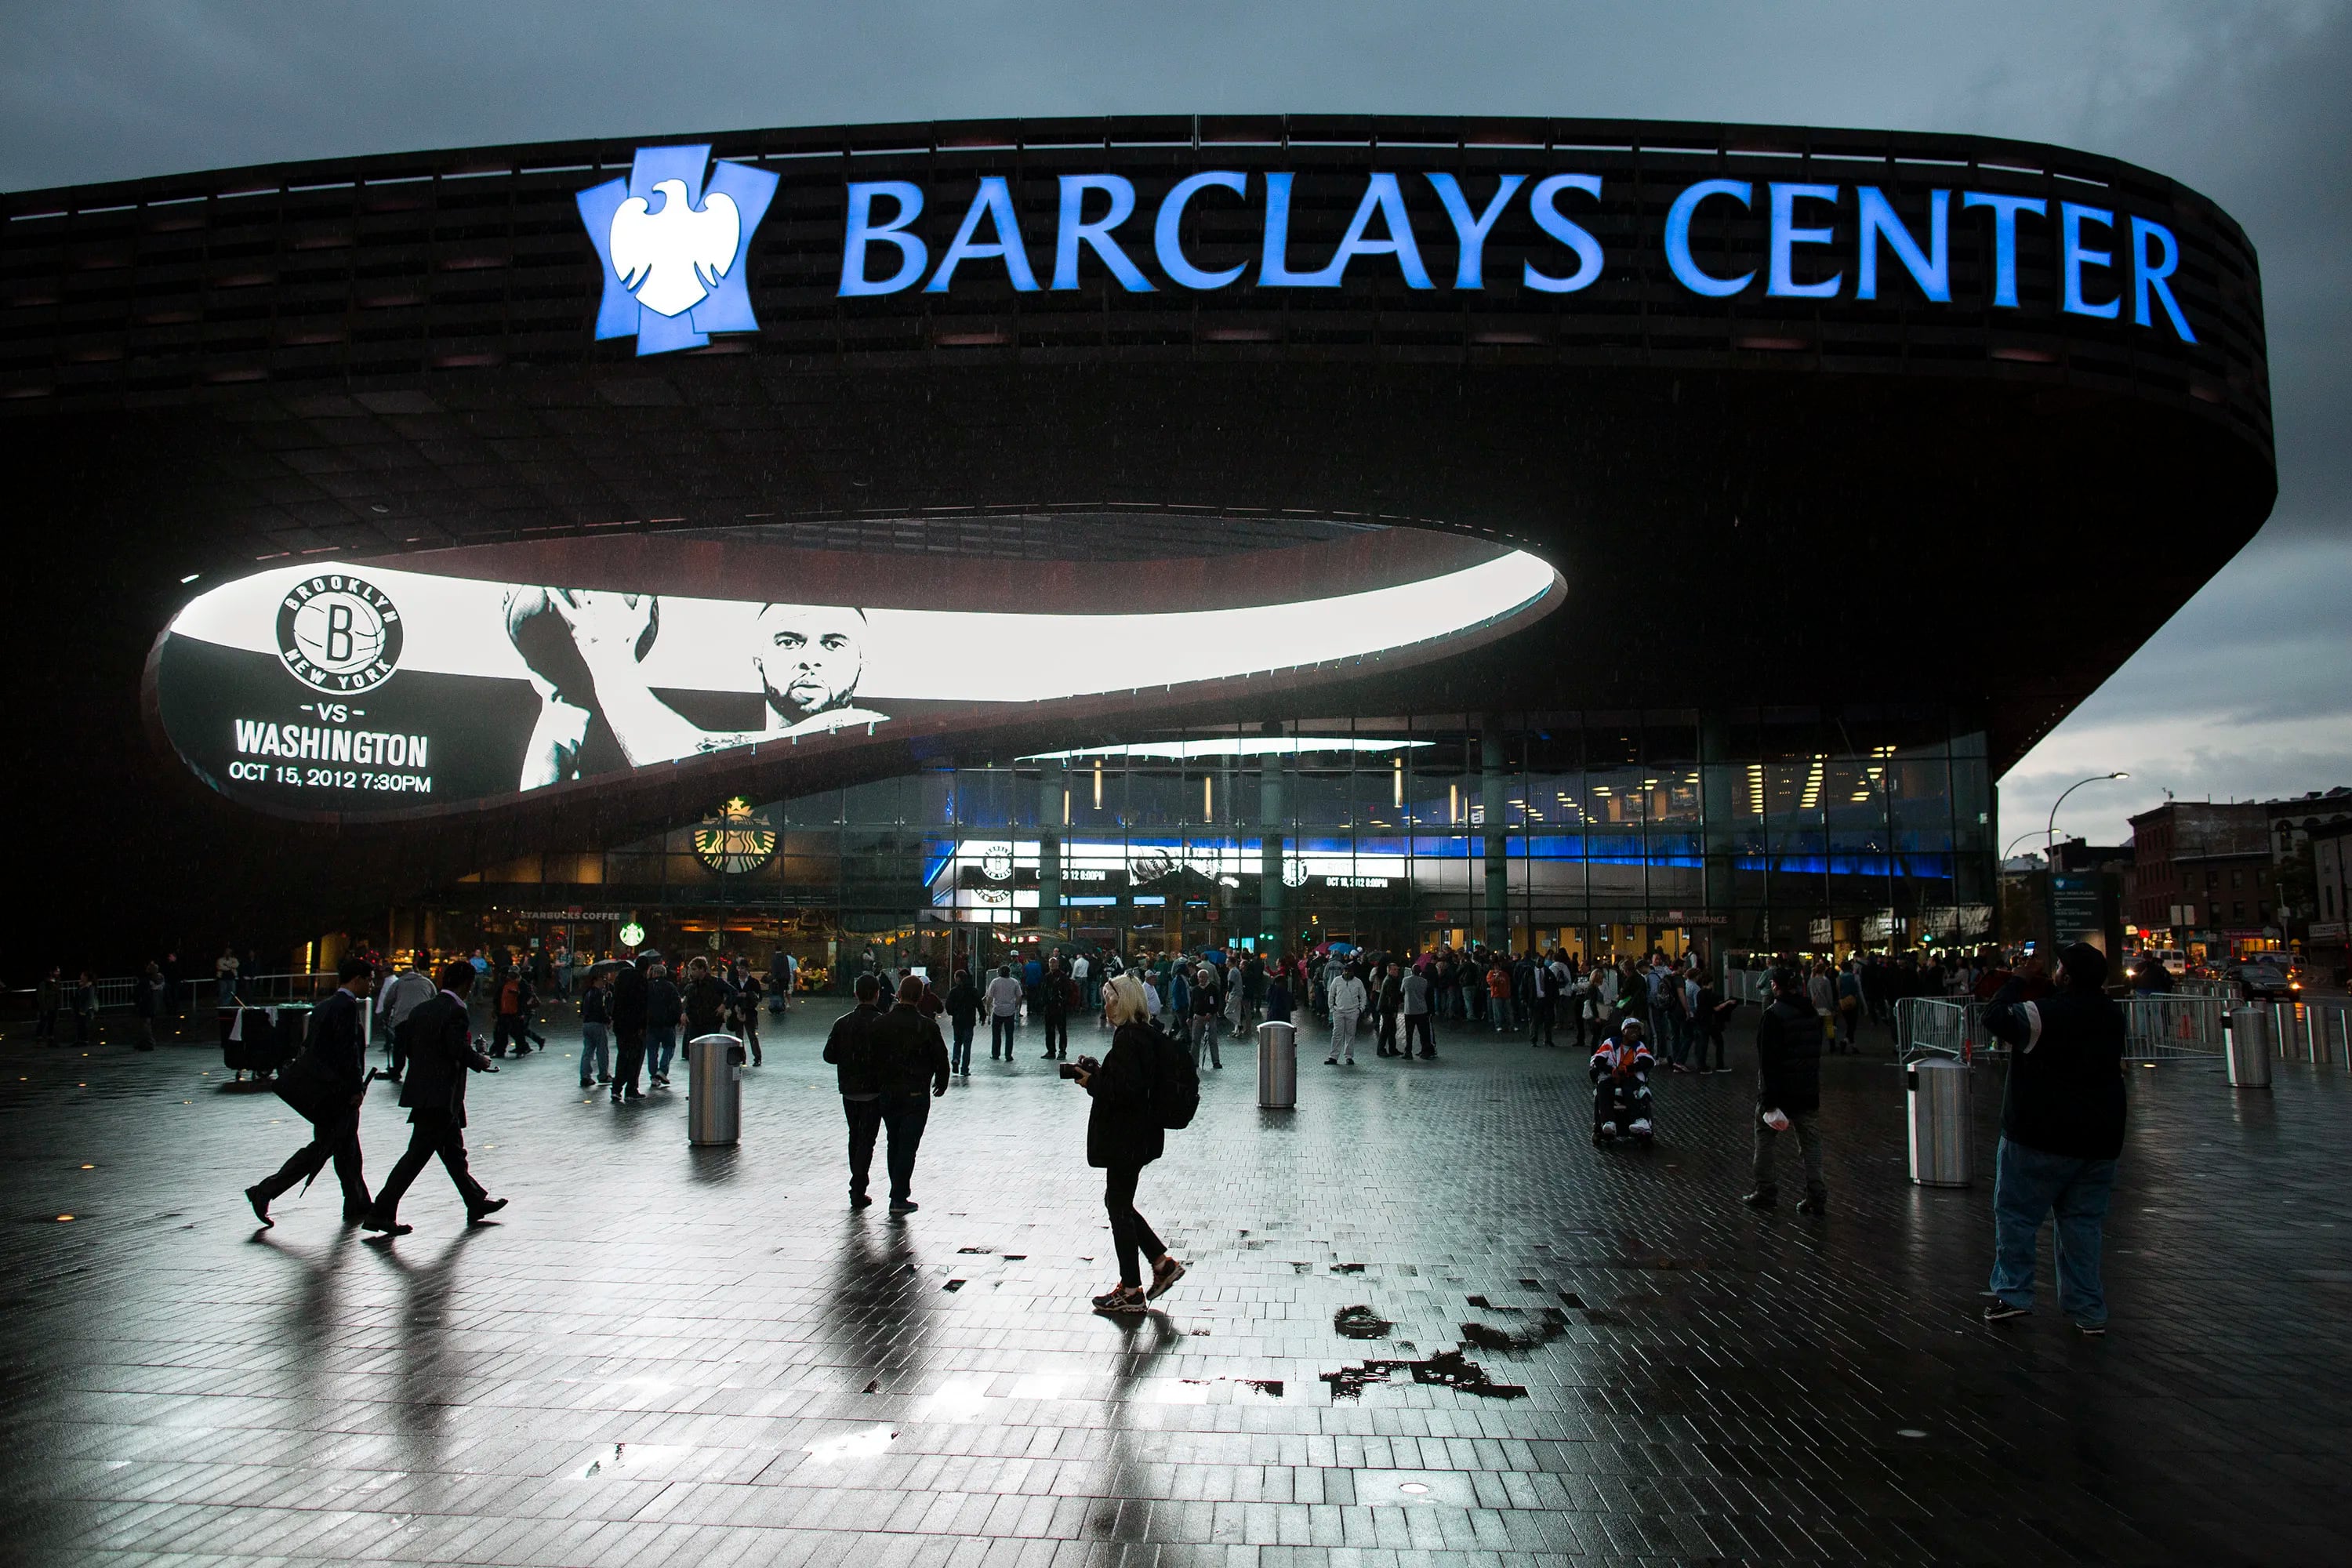 The Barclays Center in the Brooklyn borough of New York.